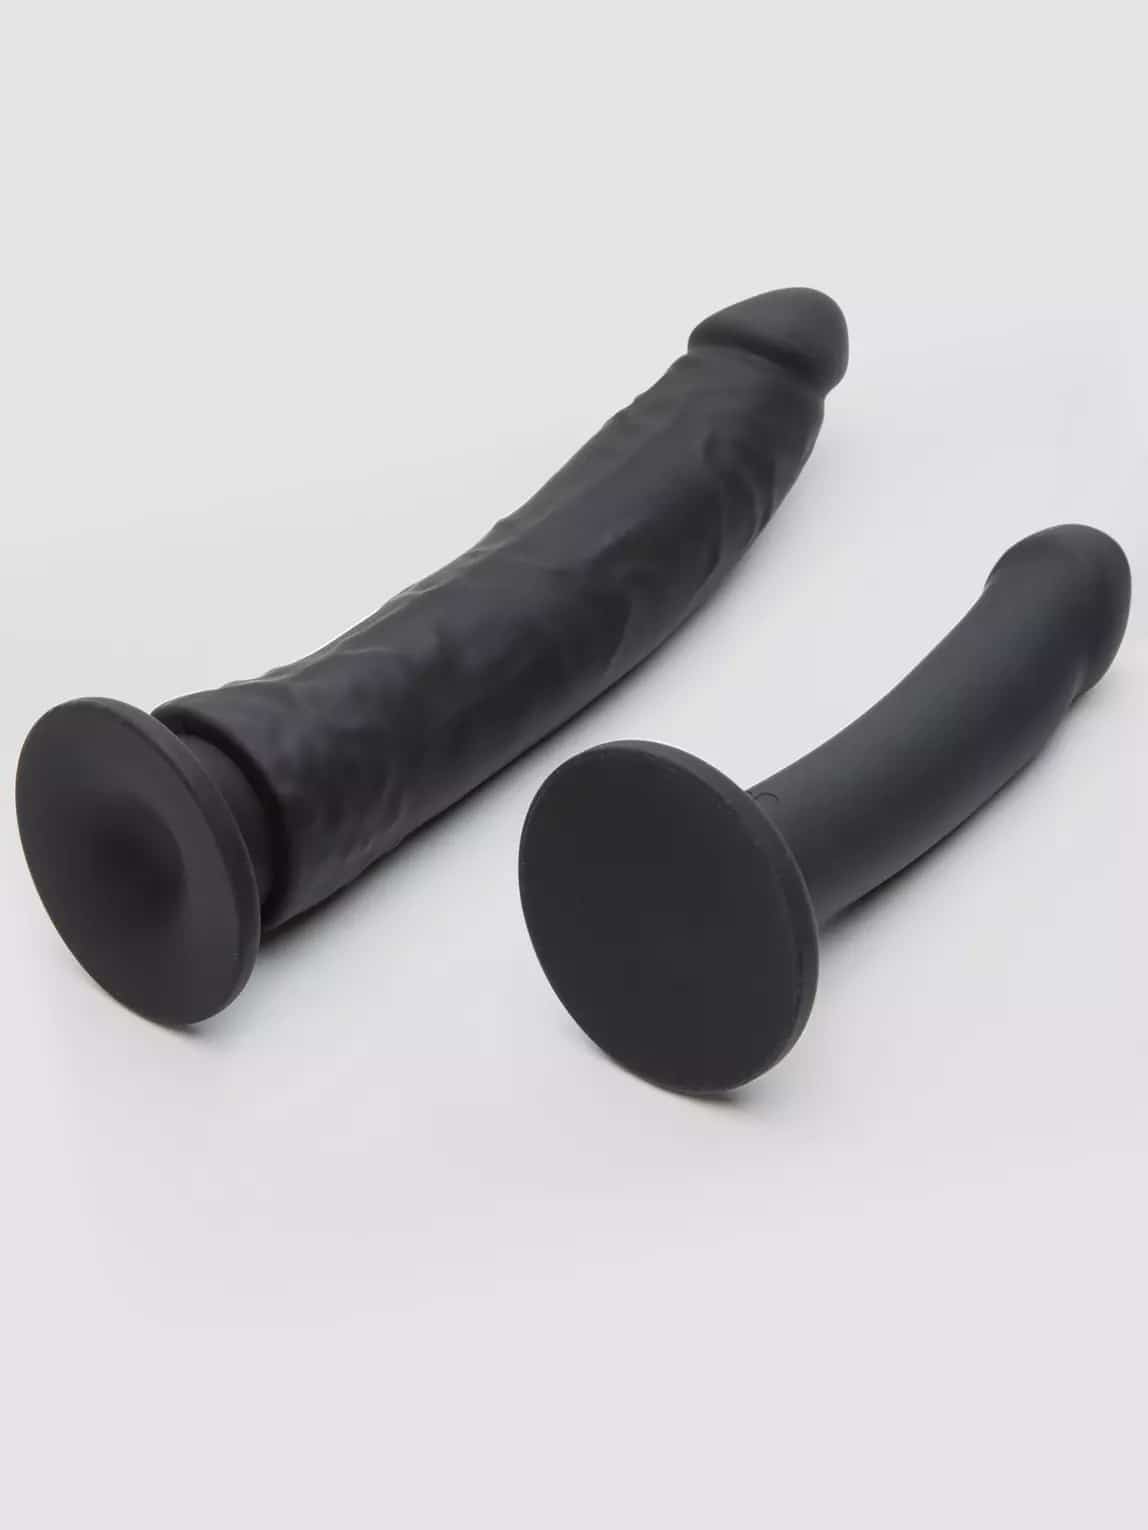 Lovehoney Deluxe Strap-On Harness Kit with 2 Silicone Dildos. Slide 4